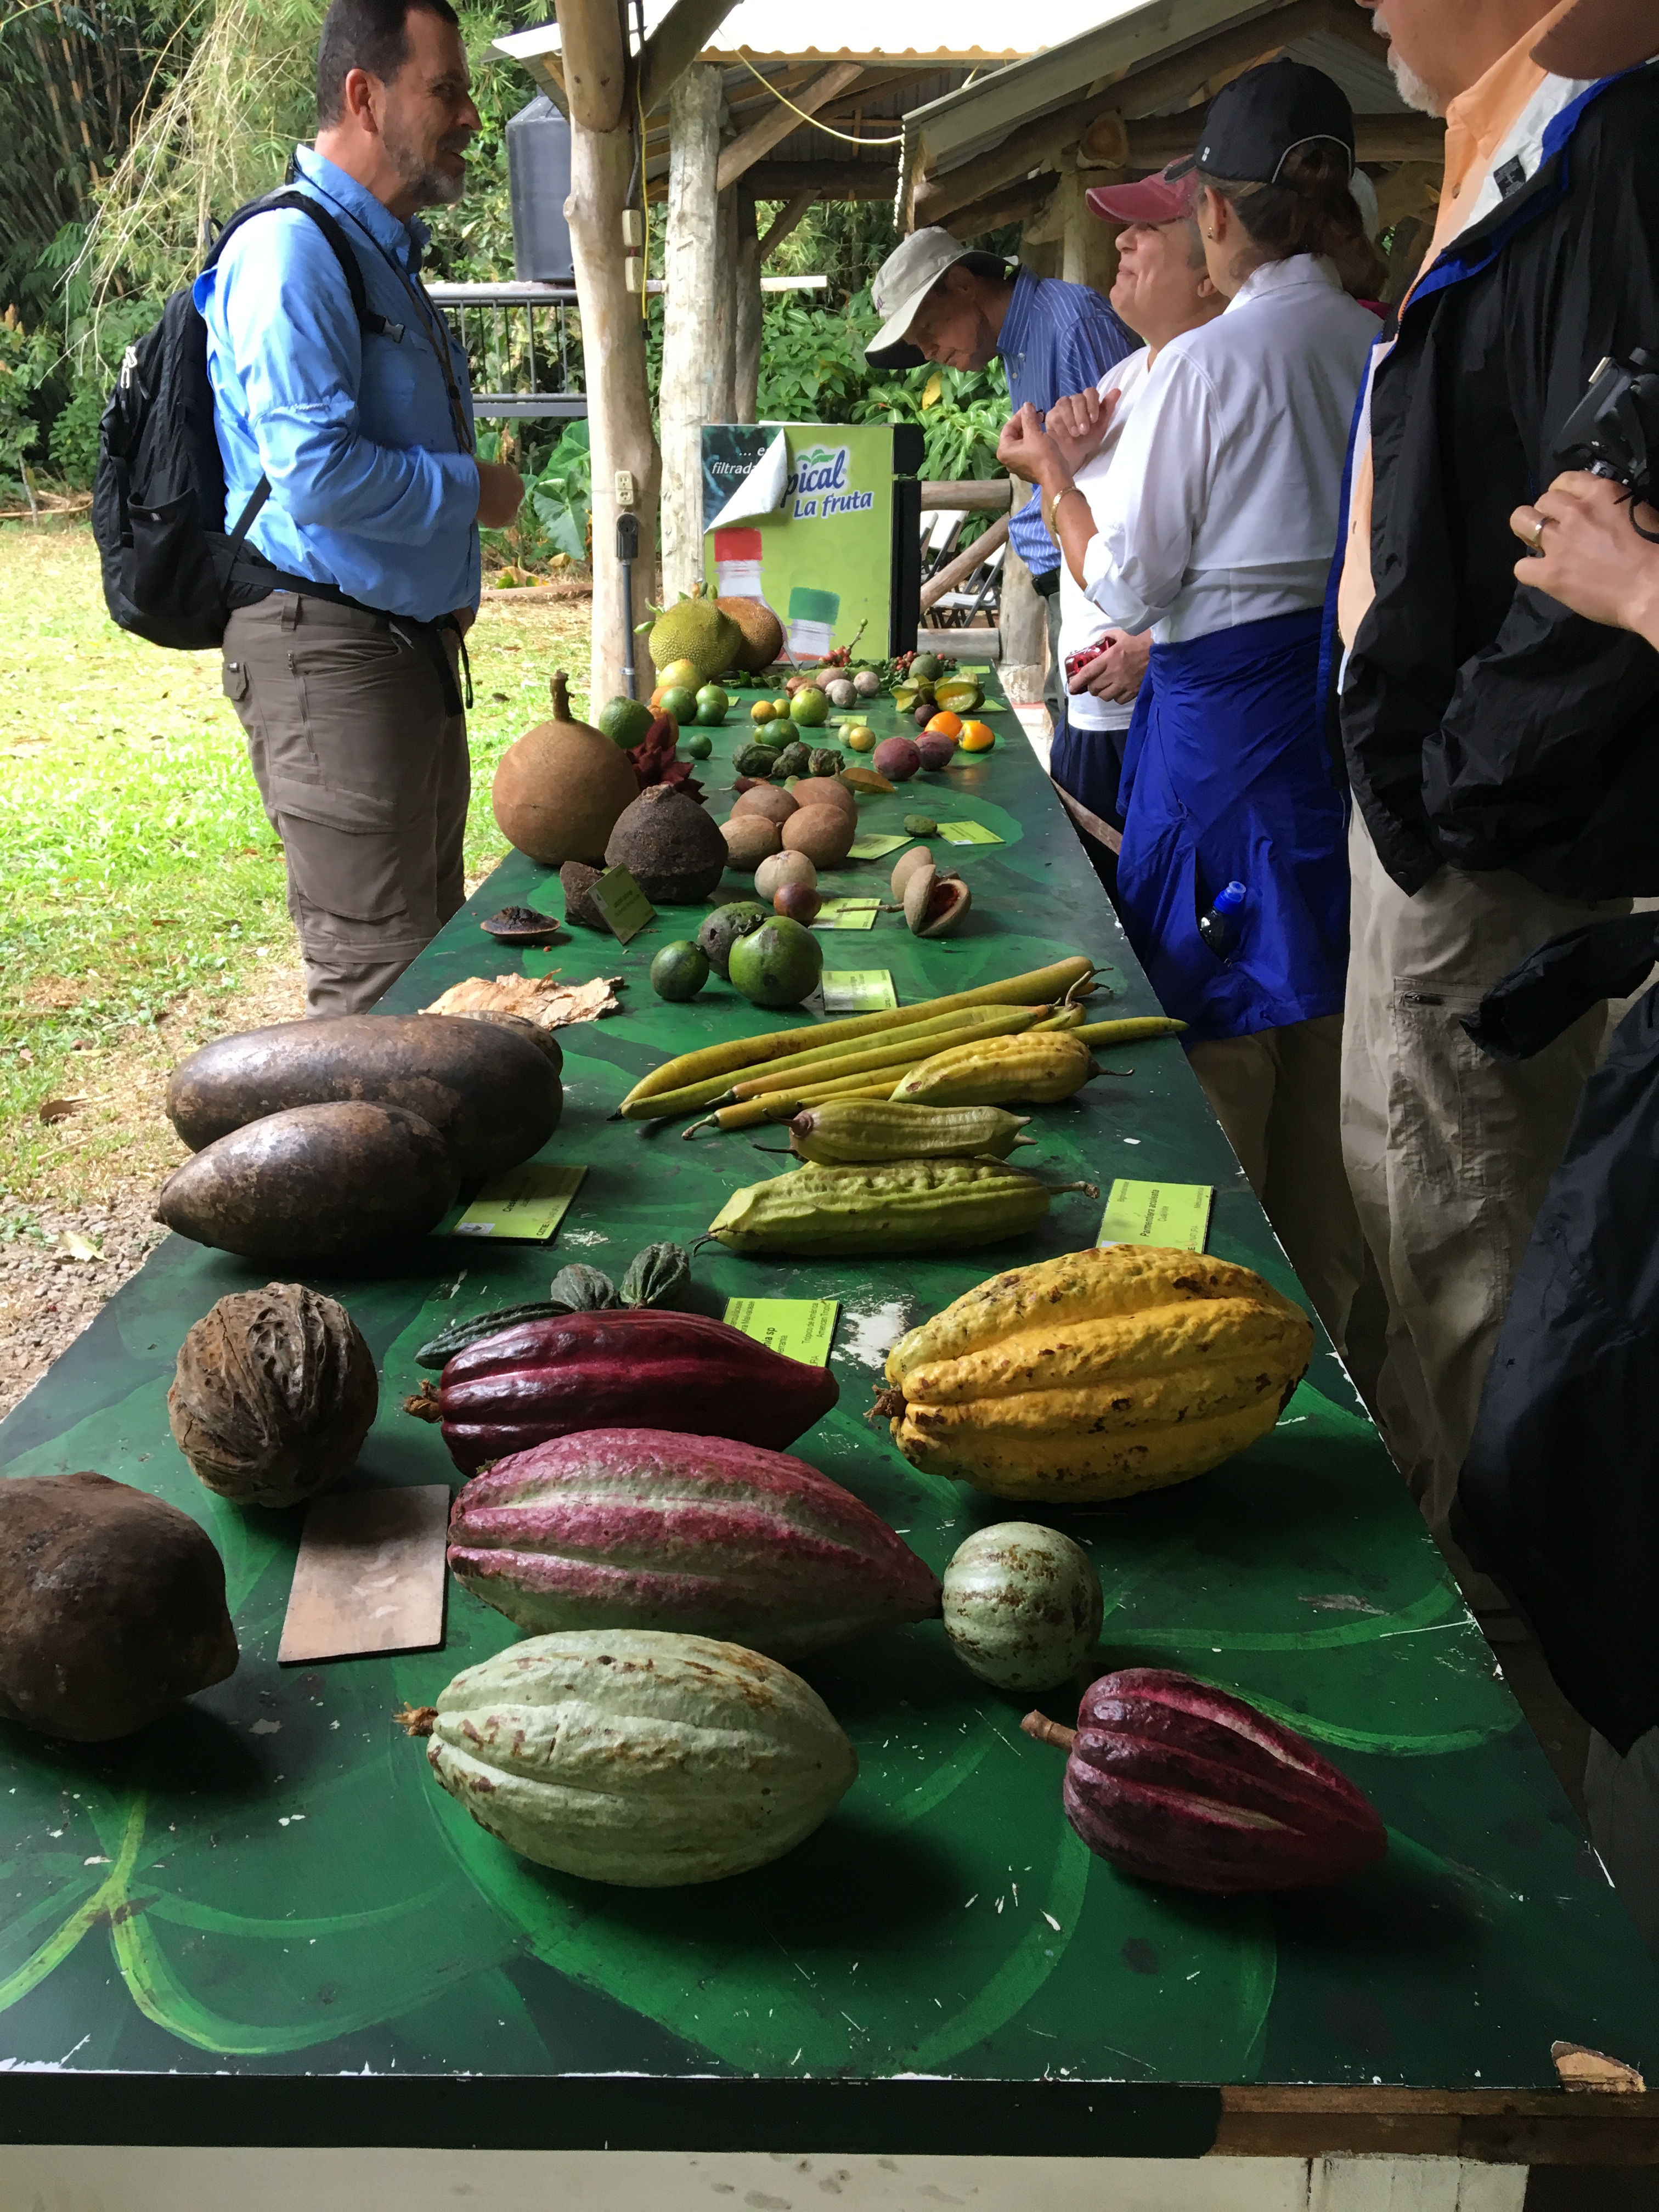 People stand beside a table displaying numerous tropical fruits.